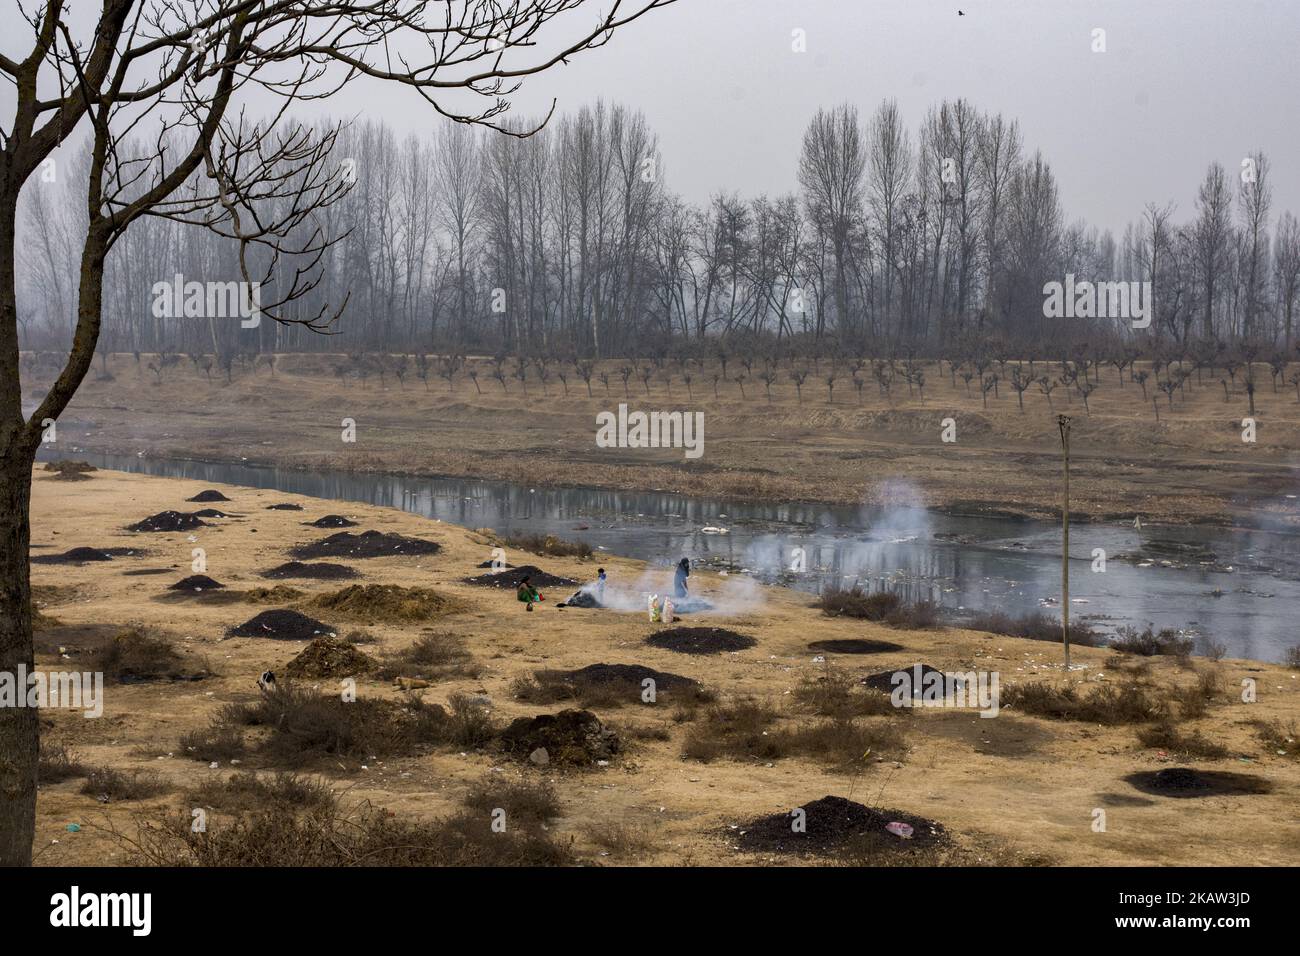 A Kashmiri woman burn the water chestnut shells to obtain charcoal which will be later used as fuel in kangris, an earthenware container with an outer encasement of wickerwork, filled with burning coal and normally carried under the clothing for heat in winter months, on January 05, 2018 in Narbal, north of Srinagar, the summer capital of Indian Administered Kashmir, India. Water chestnuts are a major crop for people living near Wular lake , Asia's second largest freshwater lake. Wular, looks more like a flat marshy plain than a large lake in winters, as the water level recedes entire families Stock Photo